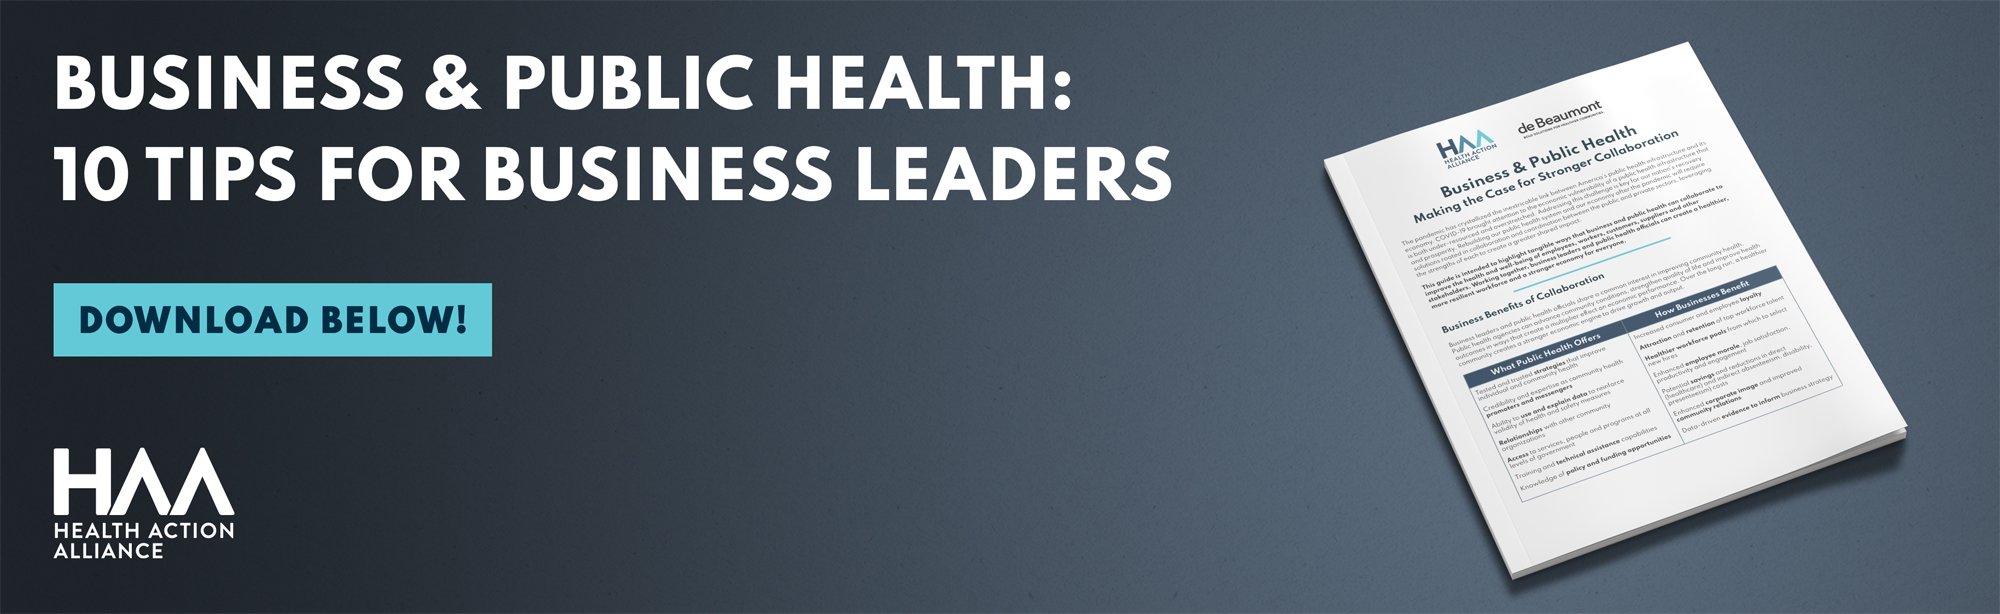 Business-&-Public-Health-10-Tips-for-Business-Leaders-Banner